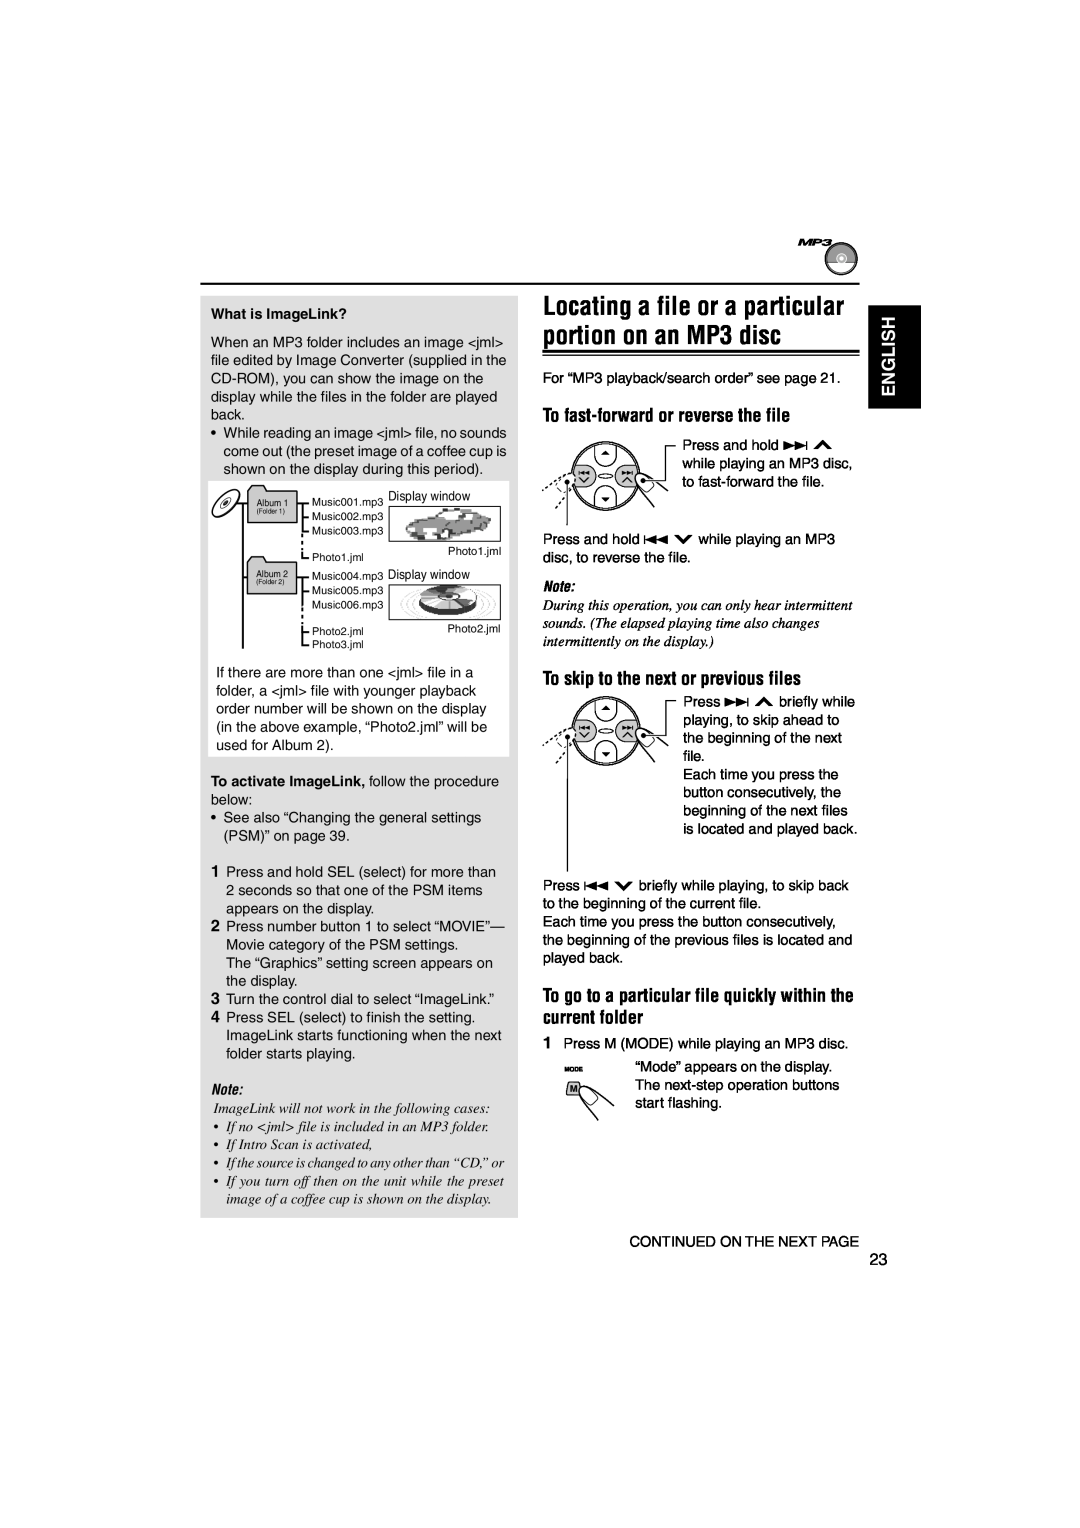 JVC KD-LH3105 manual To fast-forwardor reverse the file, To skip to the next or previous files, English, What is ImageLink? 